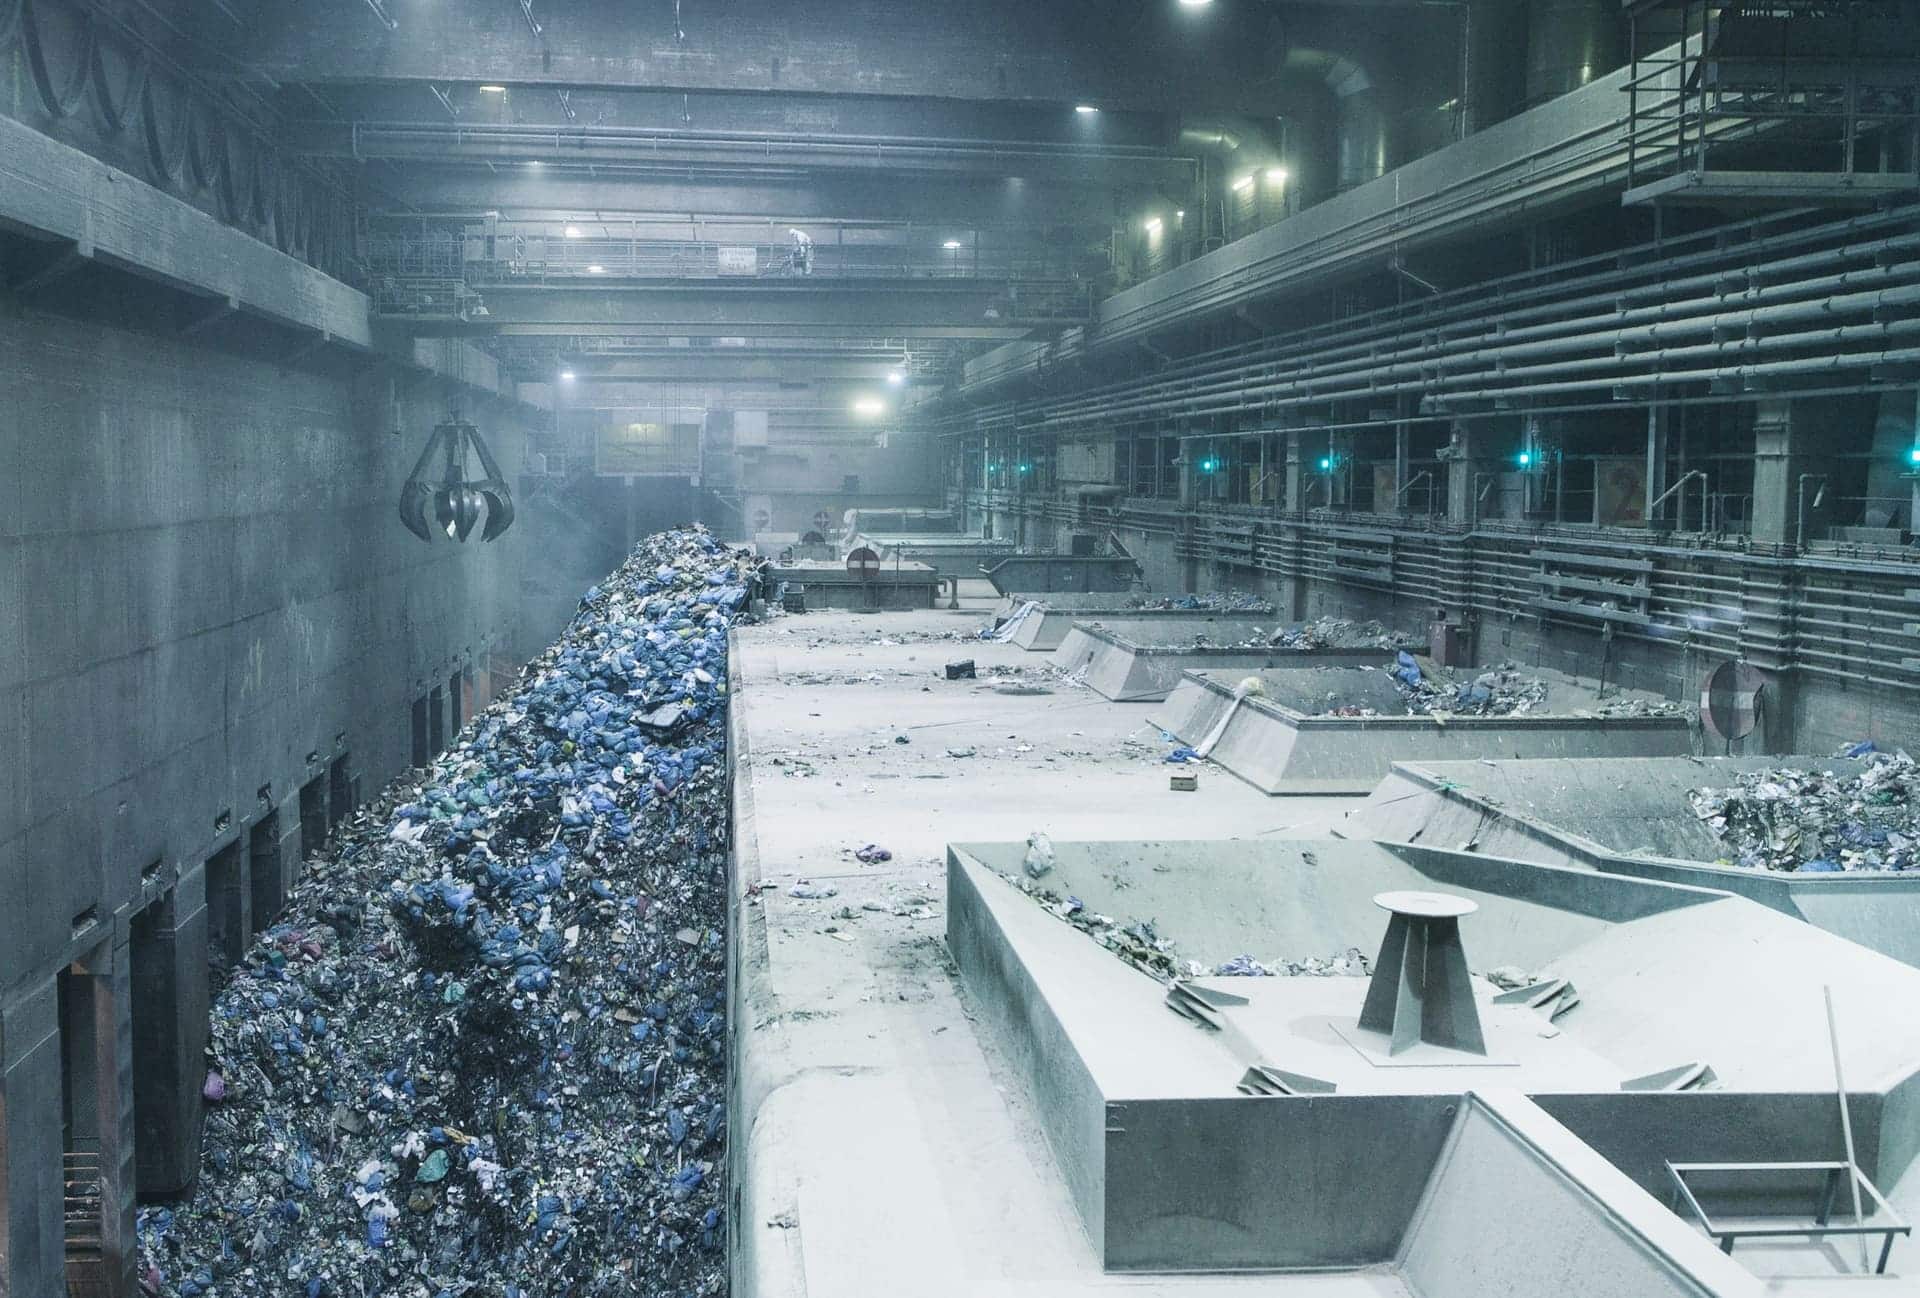 Metal Recycling Facility